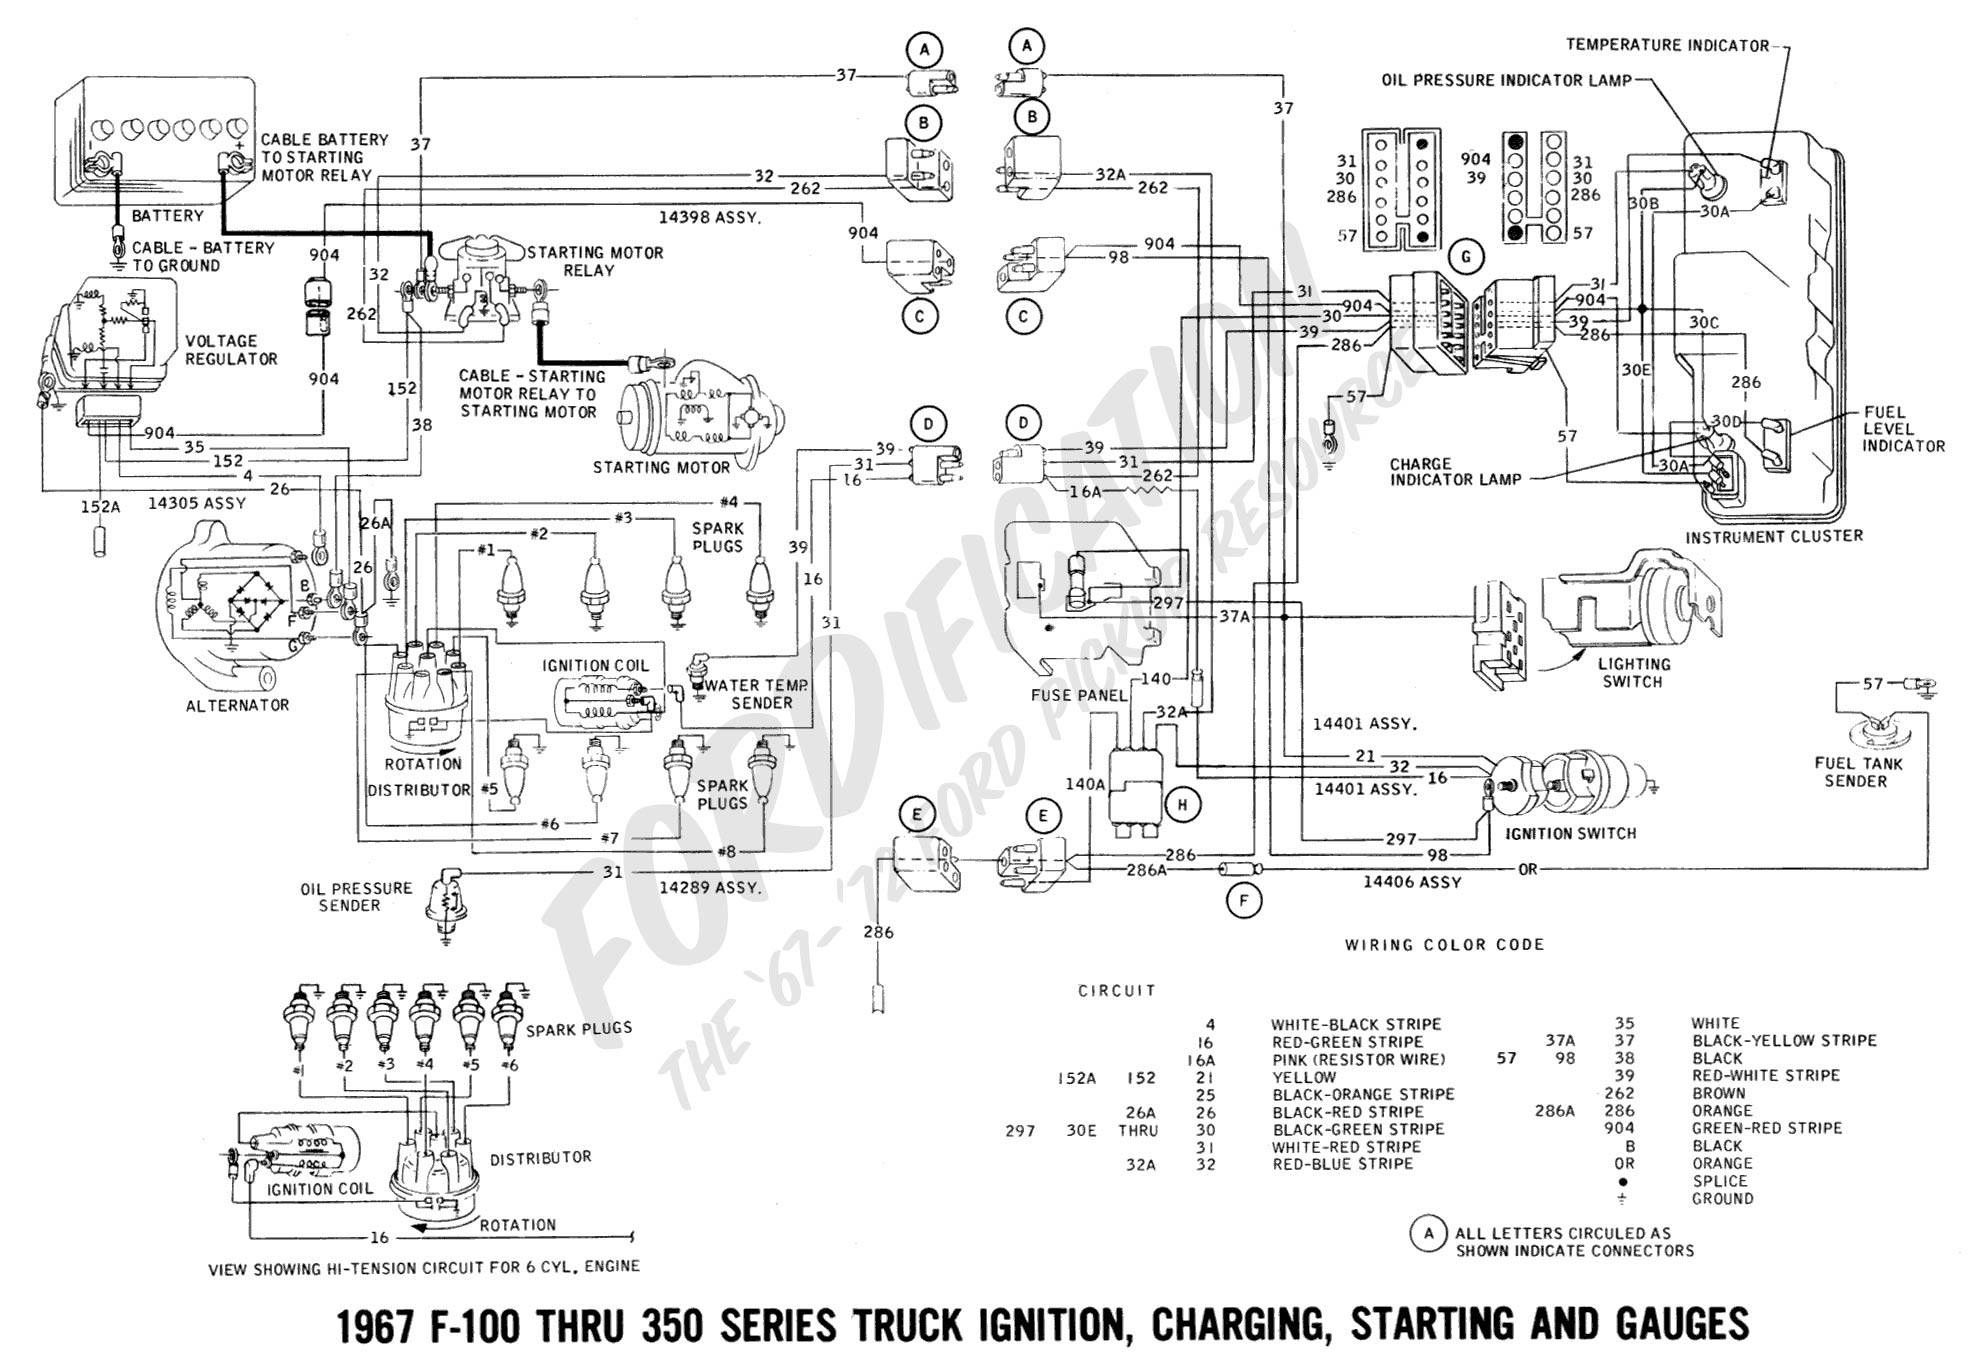 How to Wire A Fuse Box Diagram Well ford F 350 Wiring Diagram 1968 ford Mustang Fuse Box Diagram Of How to Wire A Fuse Box Diagram